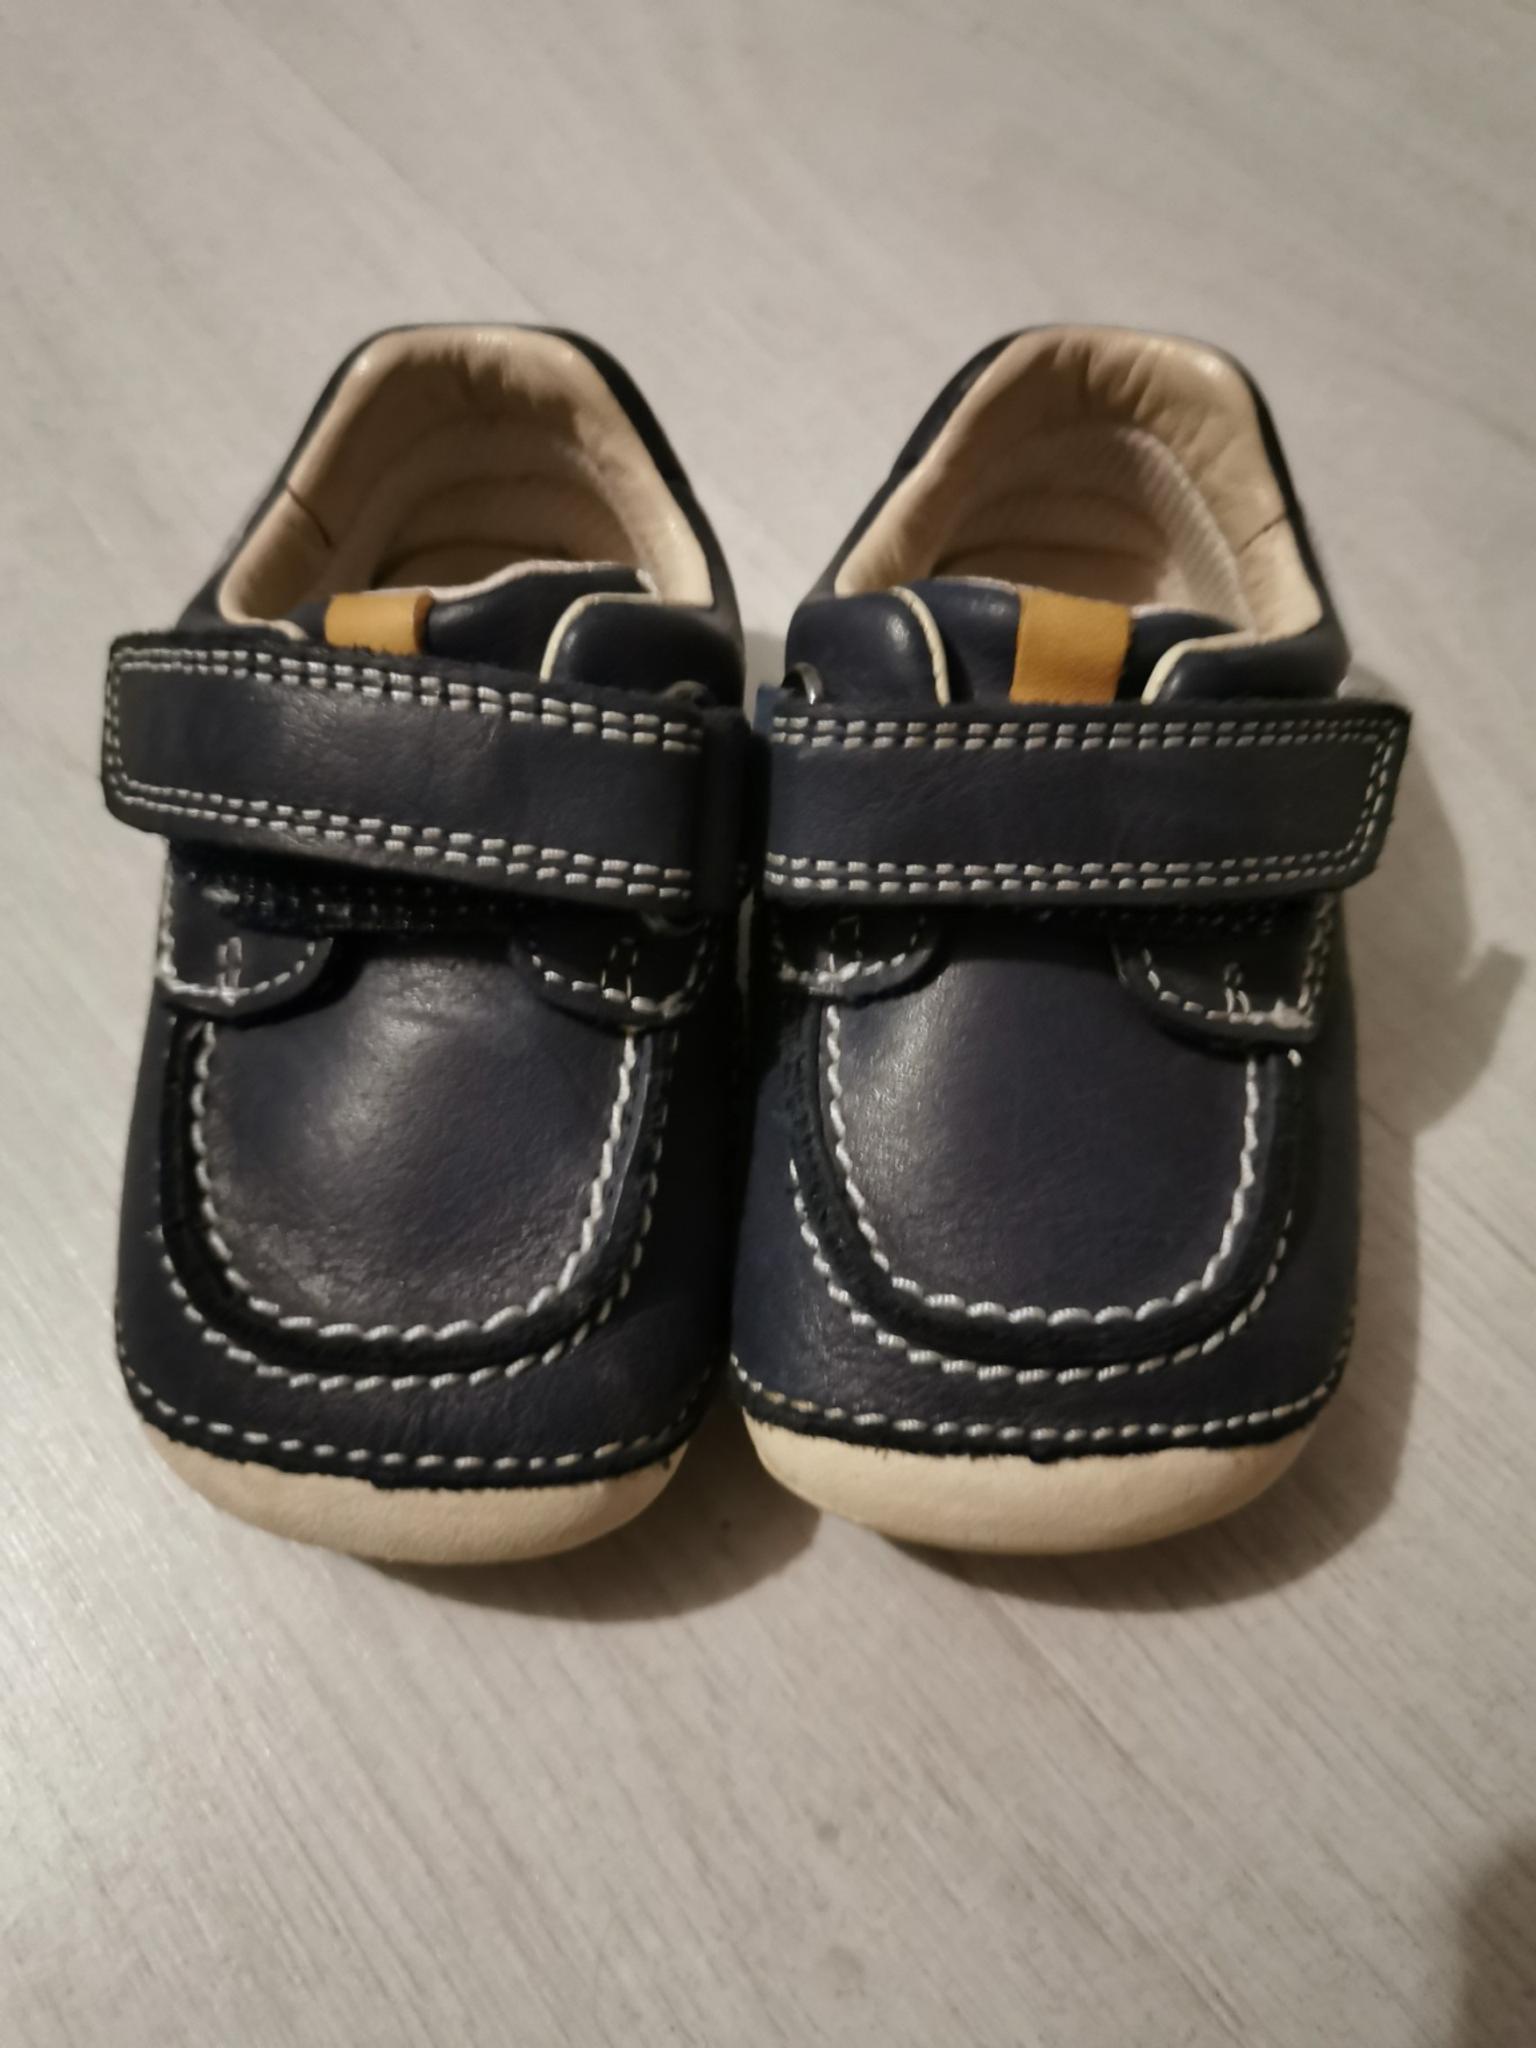 clarks first shoes stockists